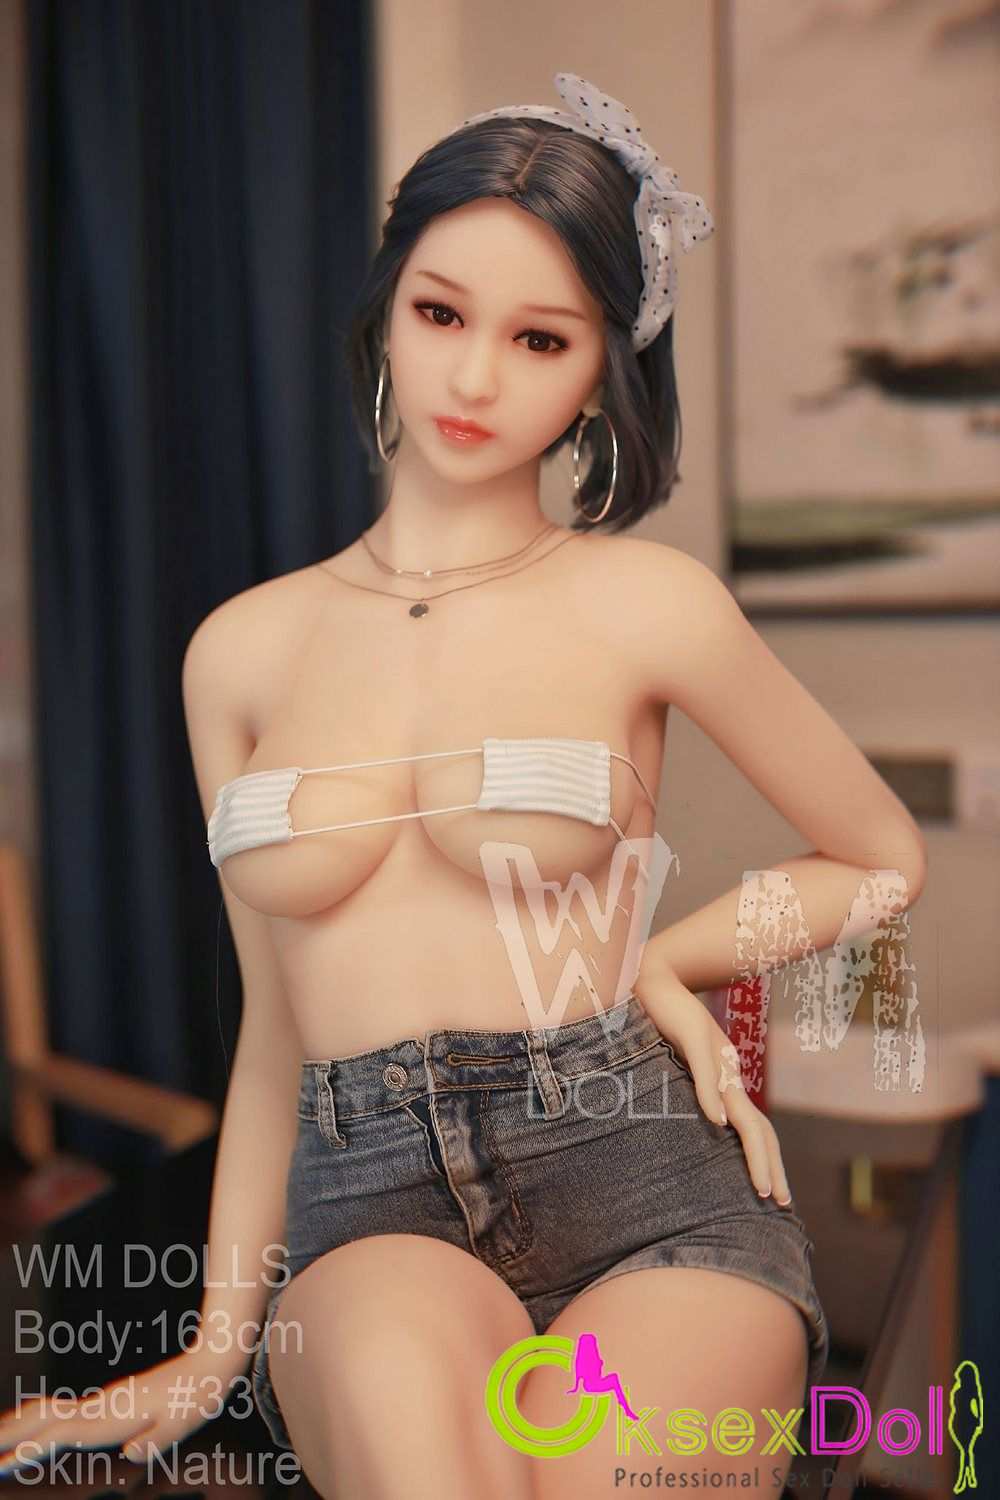 Chinese Skinny Sex Doll images